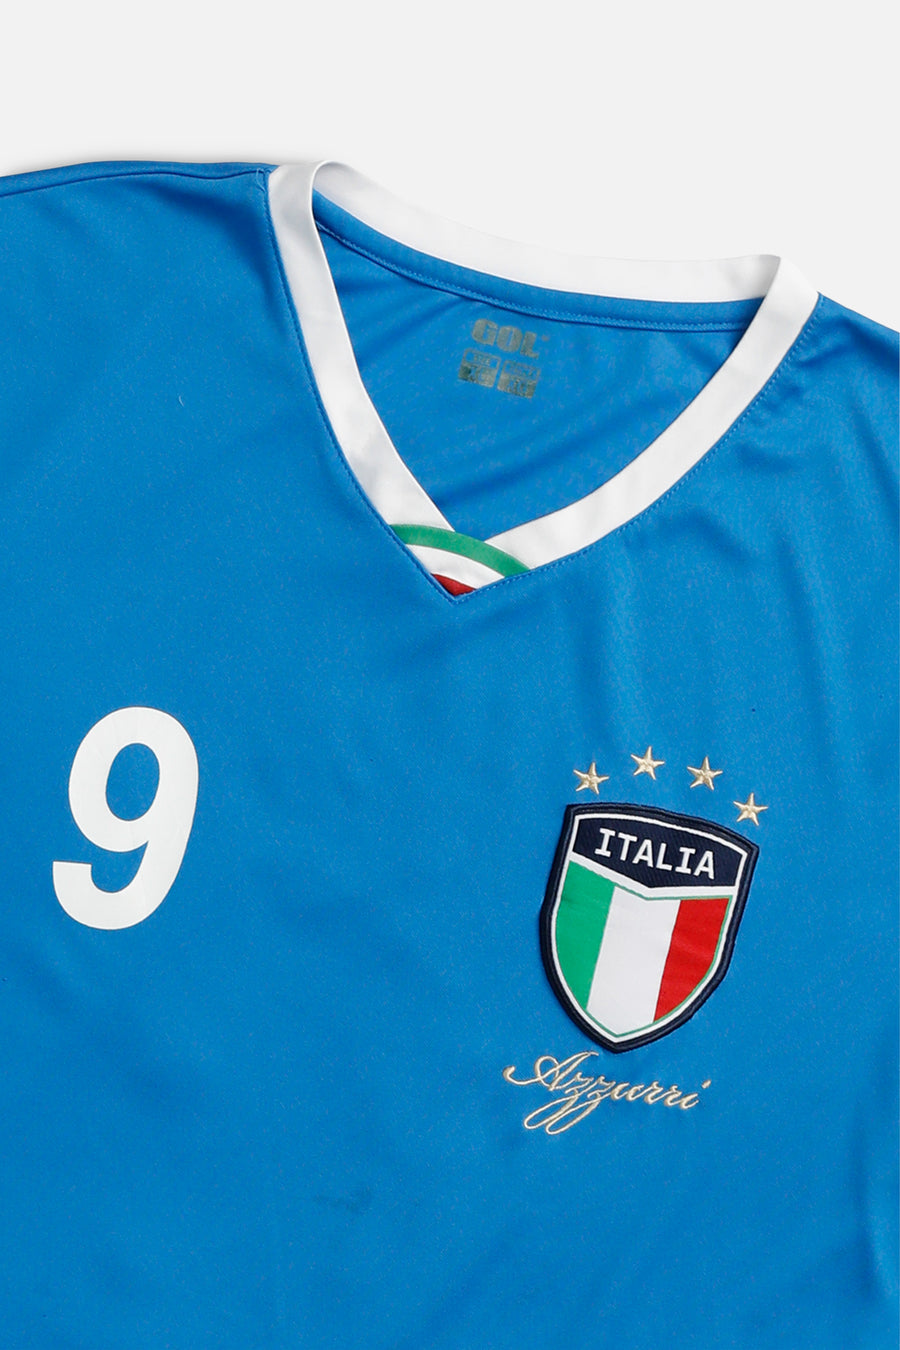 Vintage Italy Soccer Jersey - XL